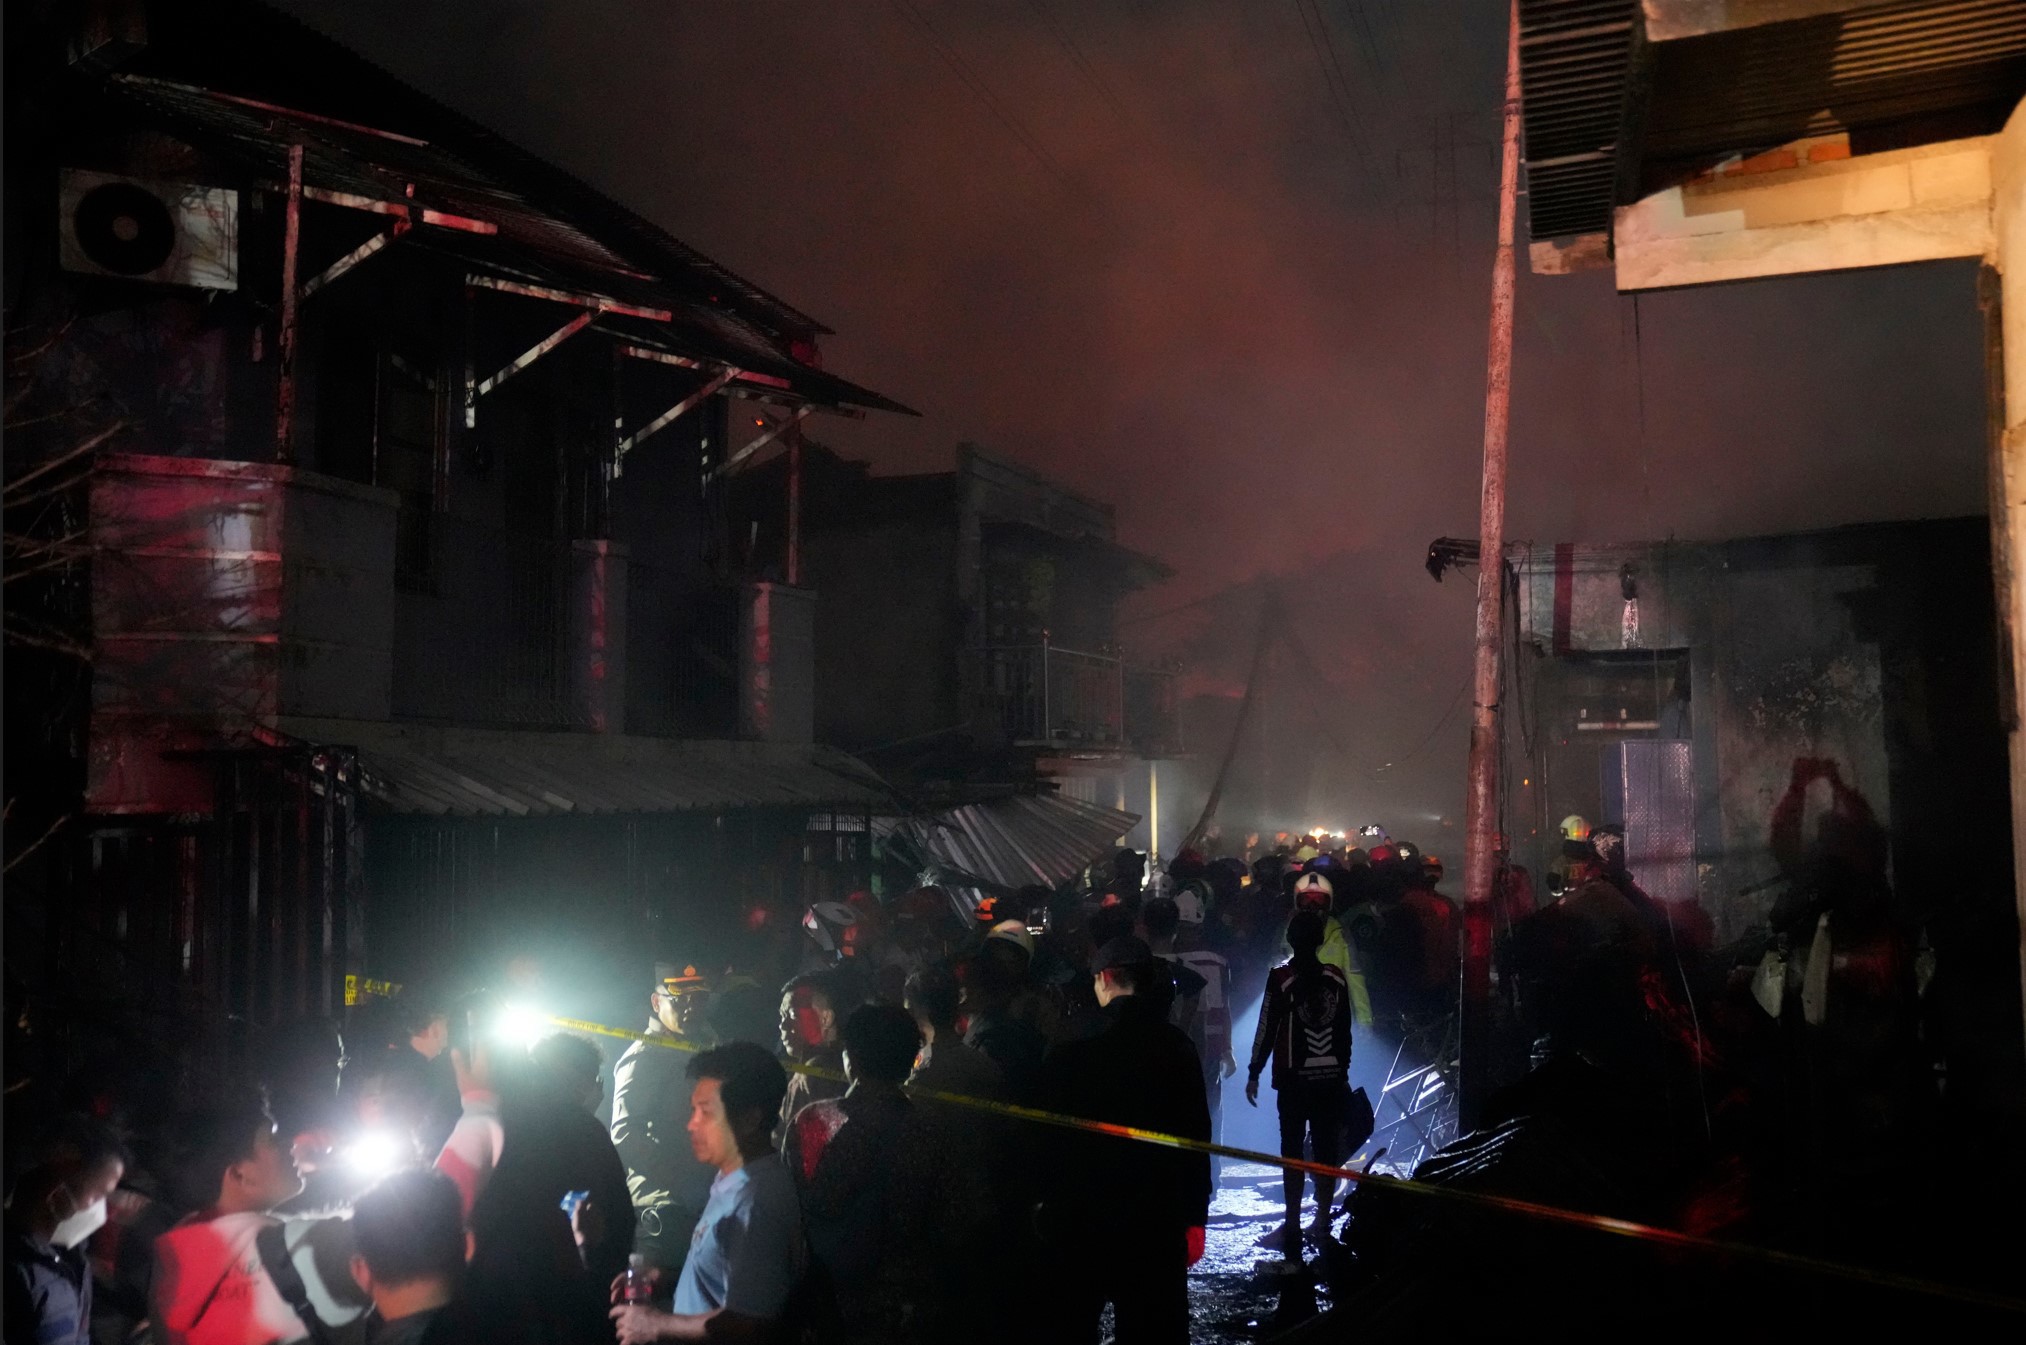 A large fire broke out at a fuel storage depot in Indonesia's capital on Friday, killing at least 17 people, injuring dozens of others and forcing the evacuation of thousands